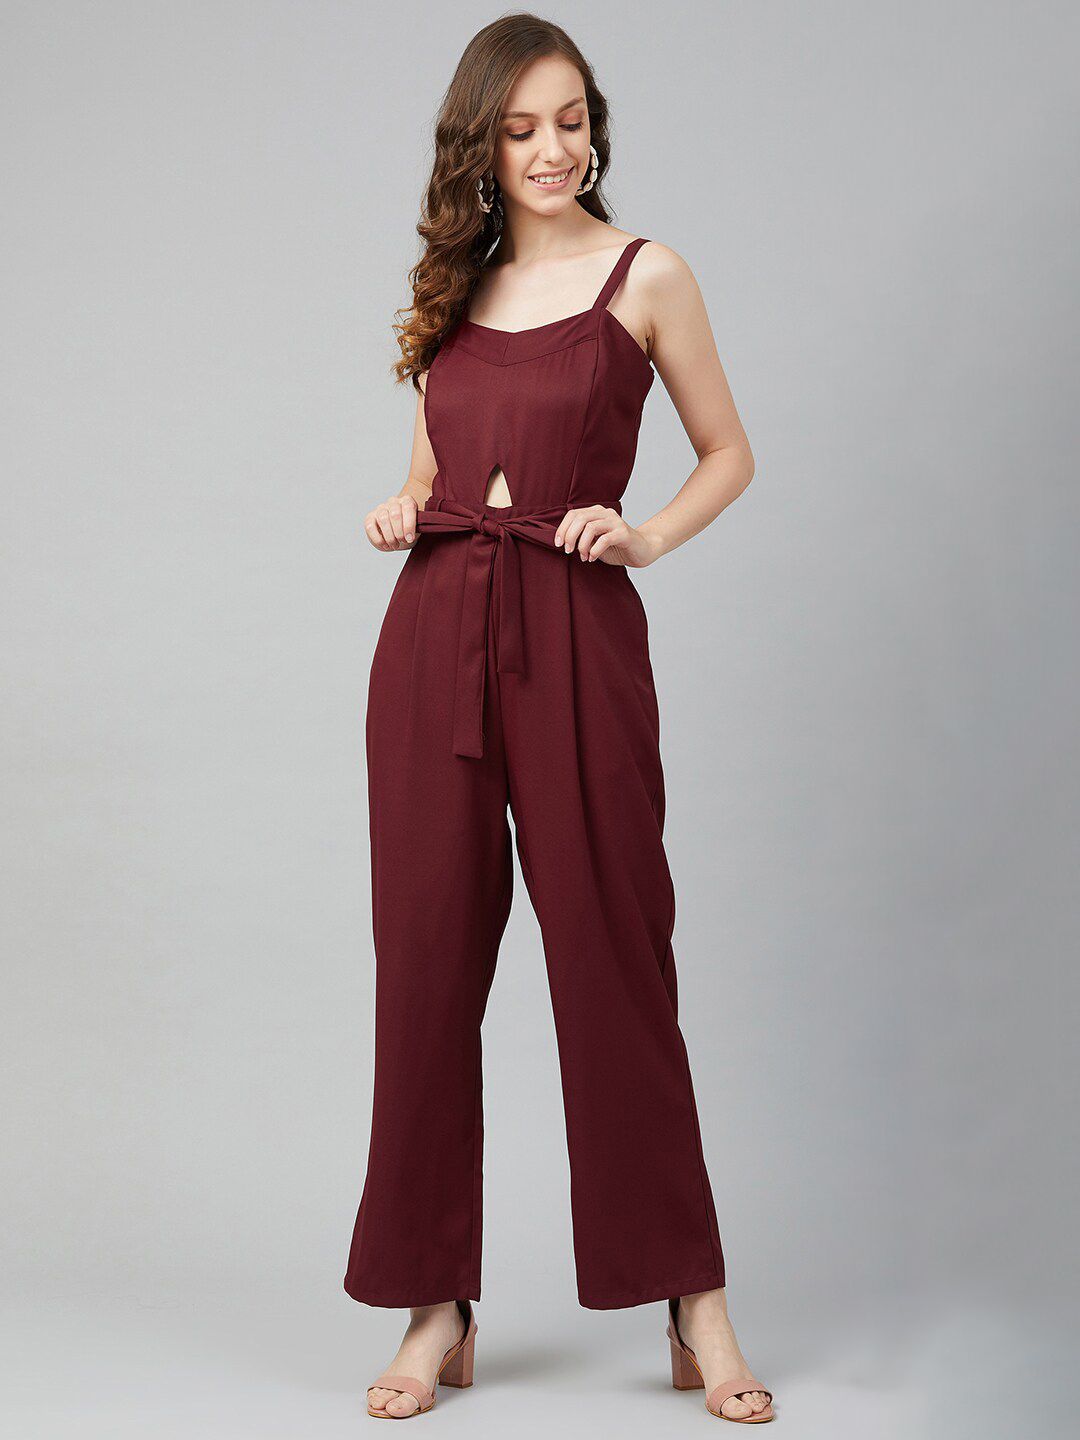 Marie Claire Women Maroon Solid Basic Jumpsuit Price in India